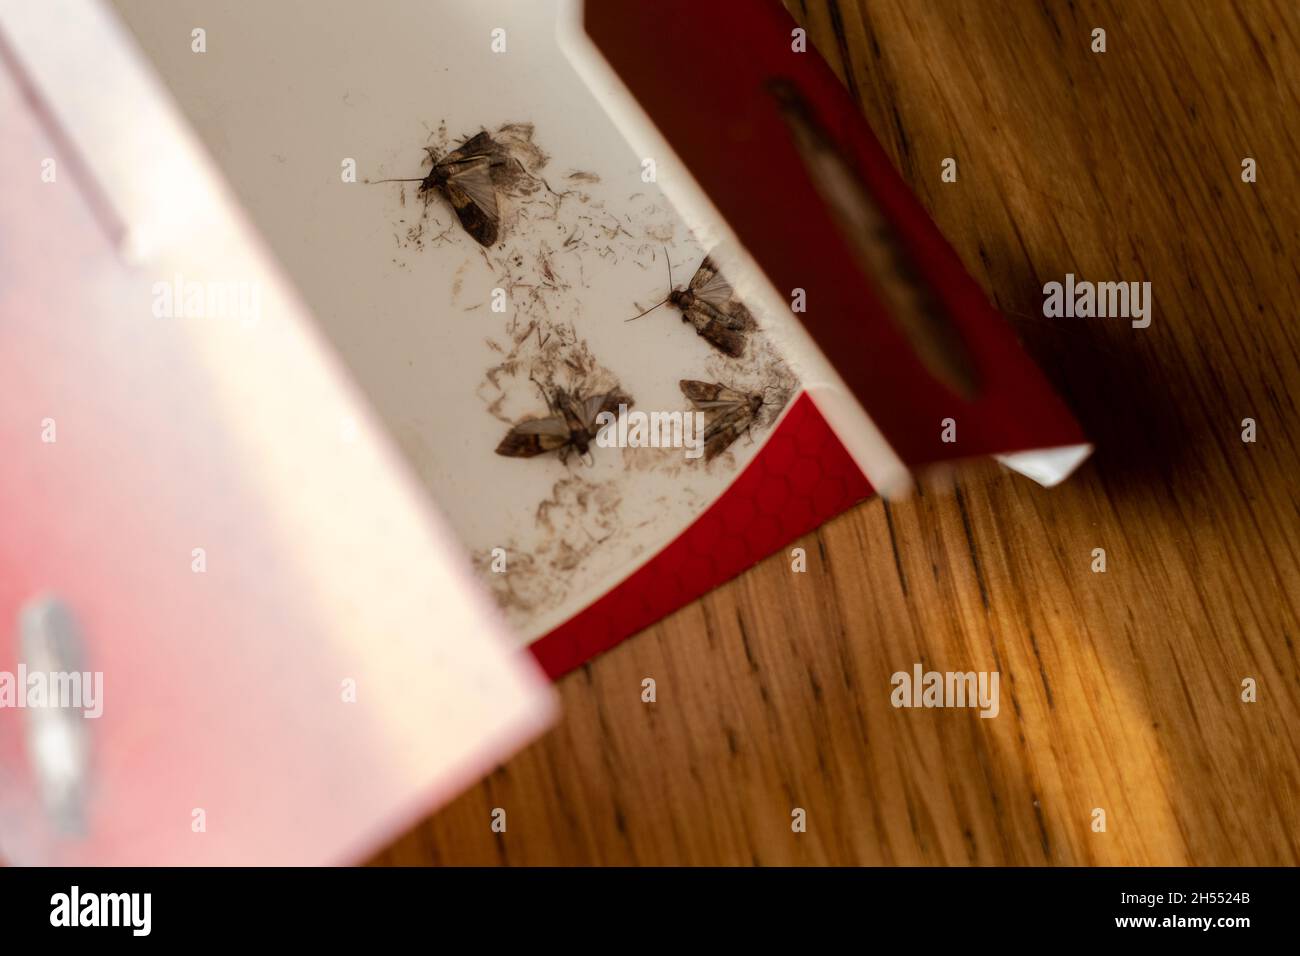 Indian meal moth or Flour moths in a sticky pheromone trap. Pest control in food shortage. Captured food moths. Stock Photo